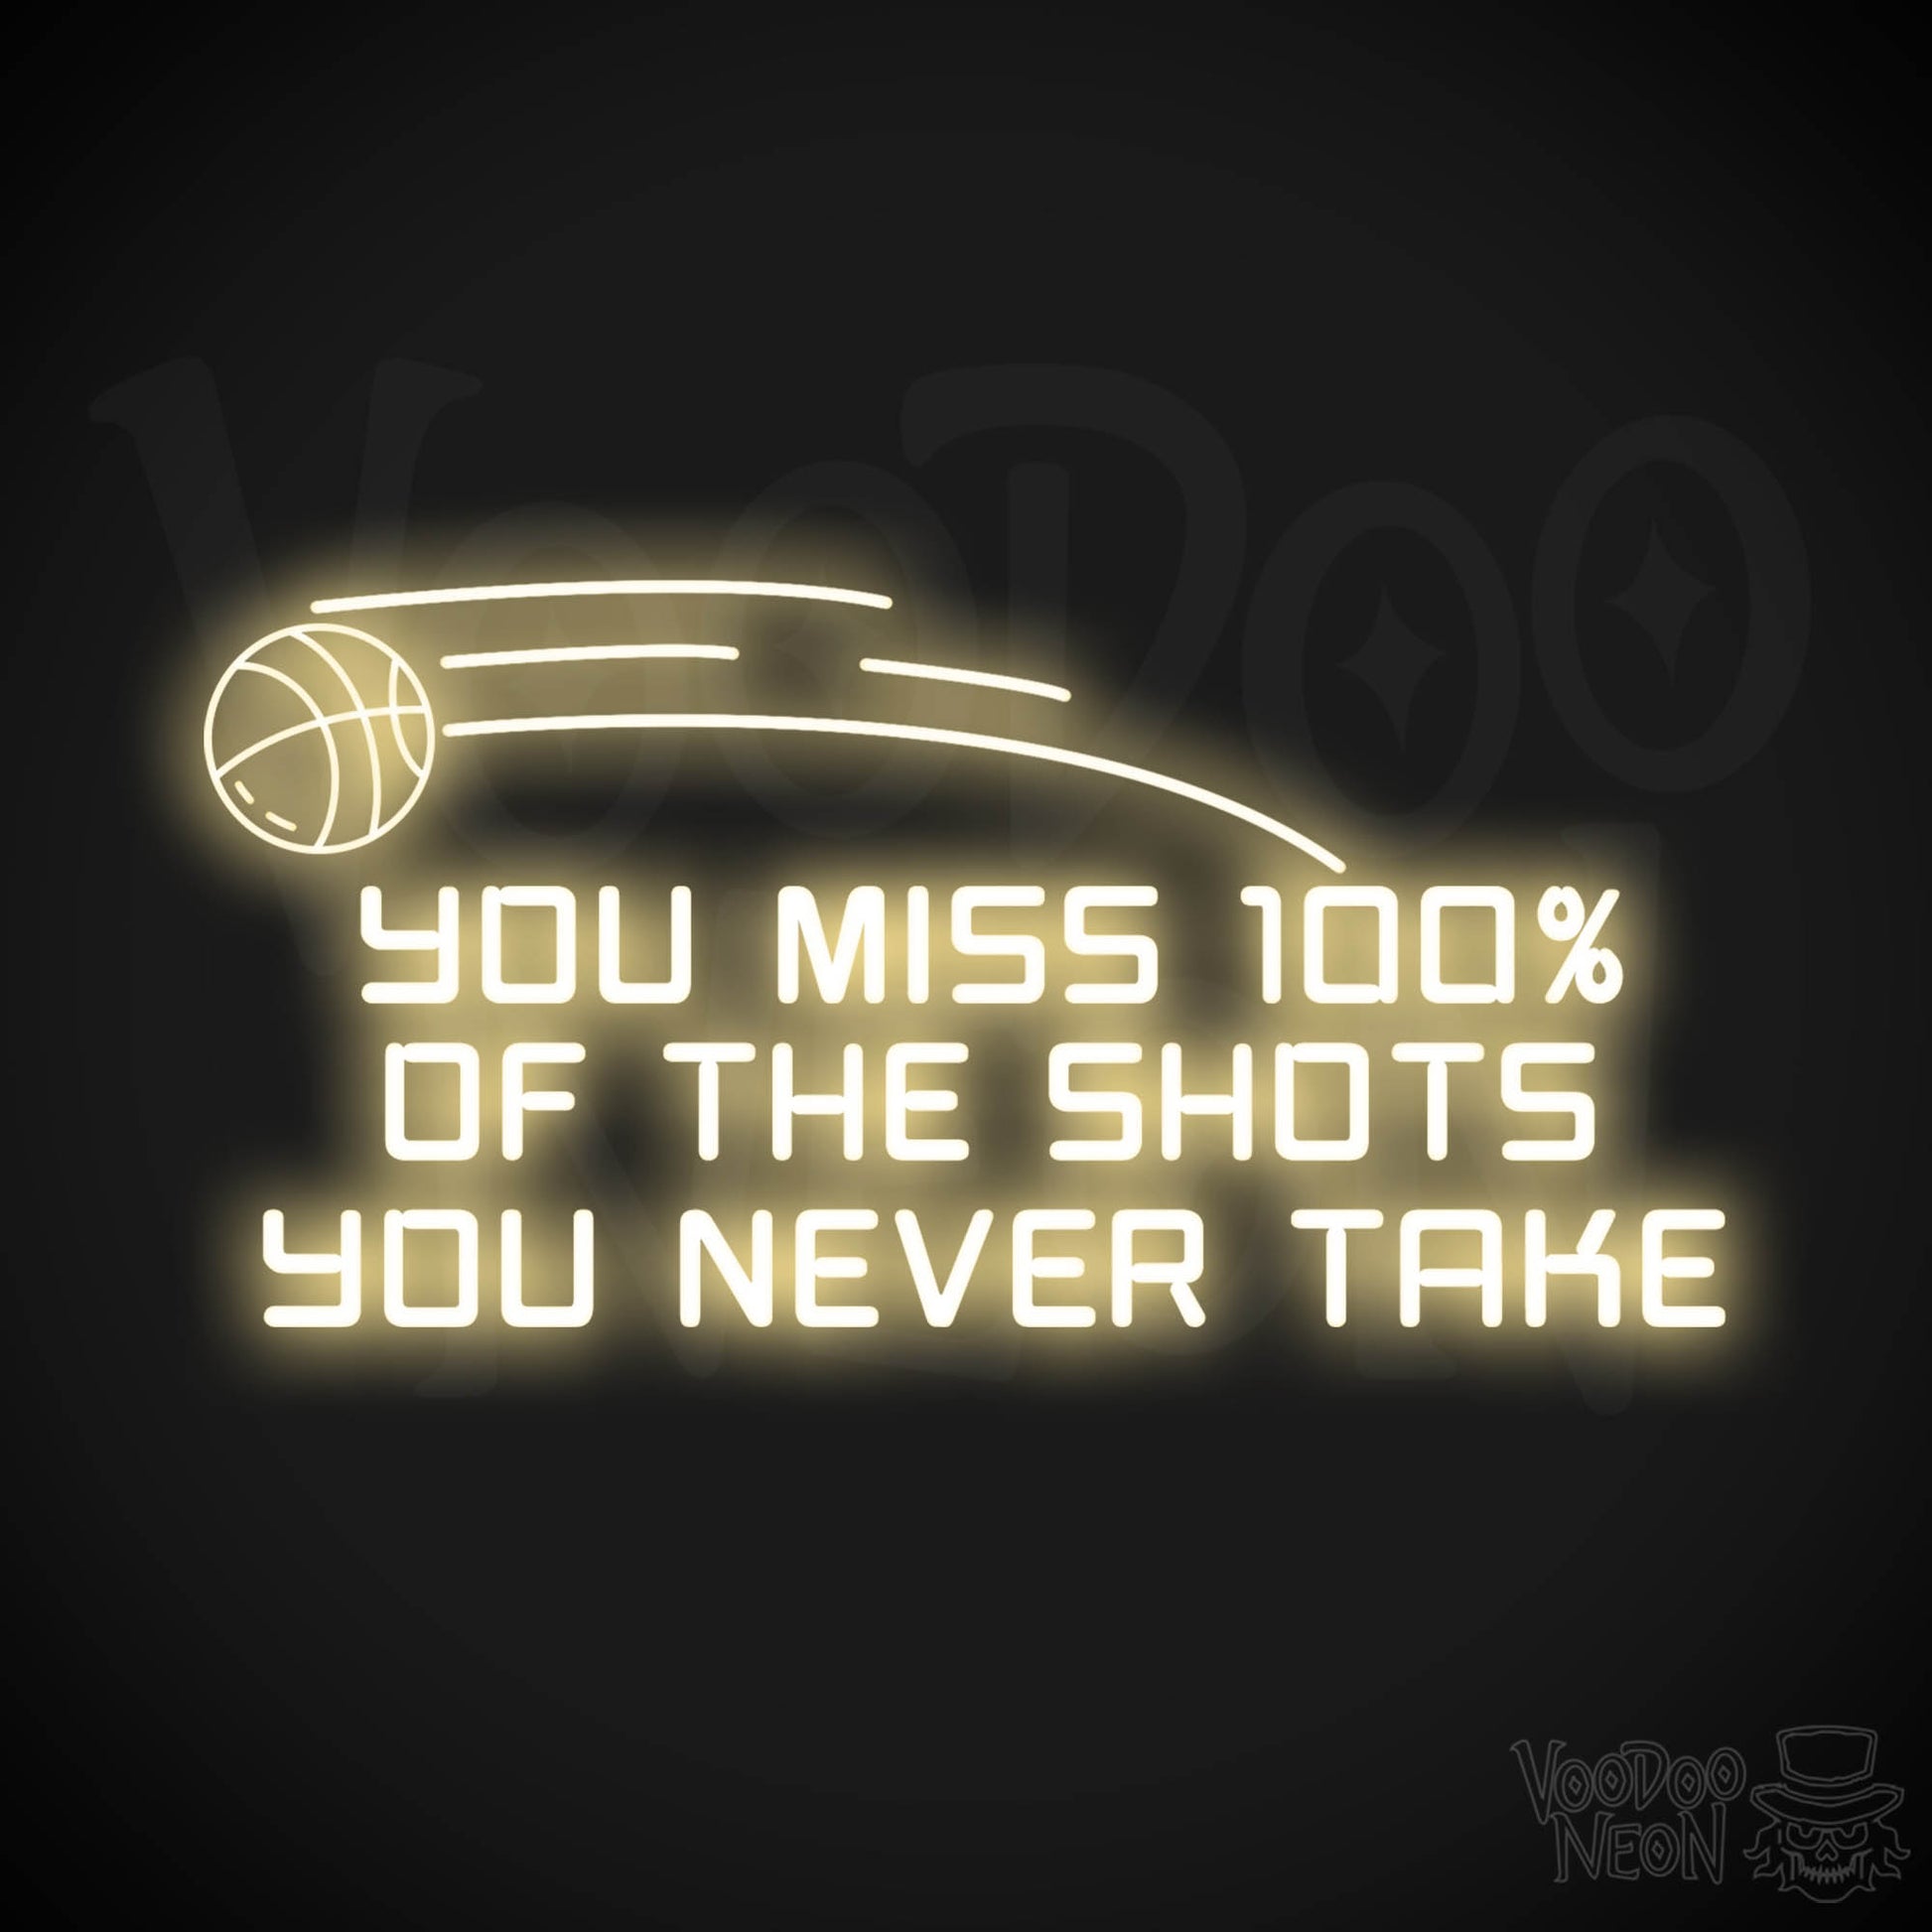 You Miss 100% of the Shots You Never Take Neon Sign - Neon Wall Art - Inspirational Signs - Color Warm White